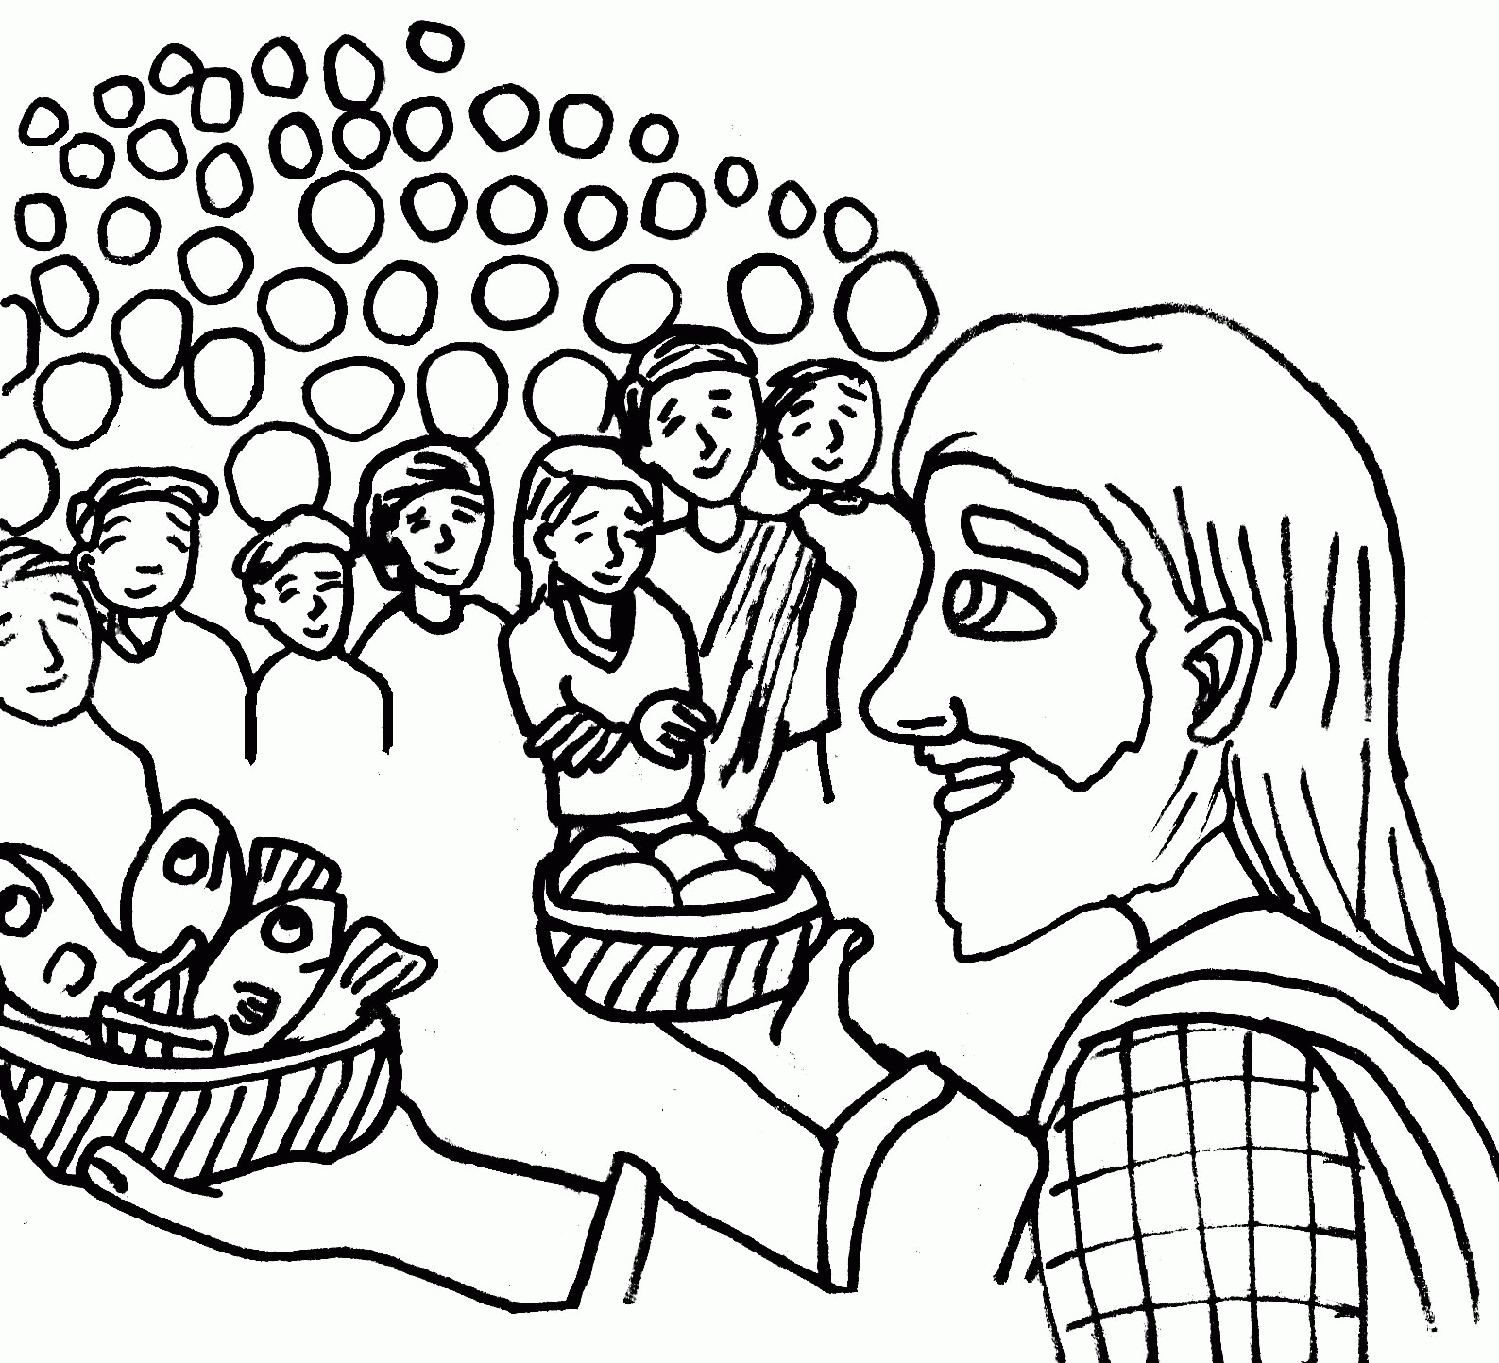 Feeding 5000 4 Cool Coloring Page